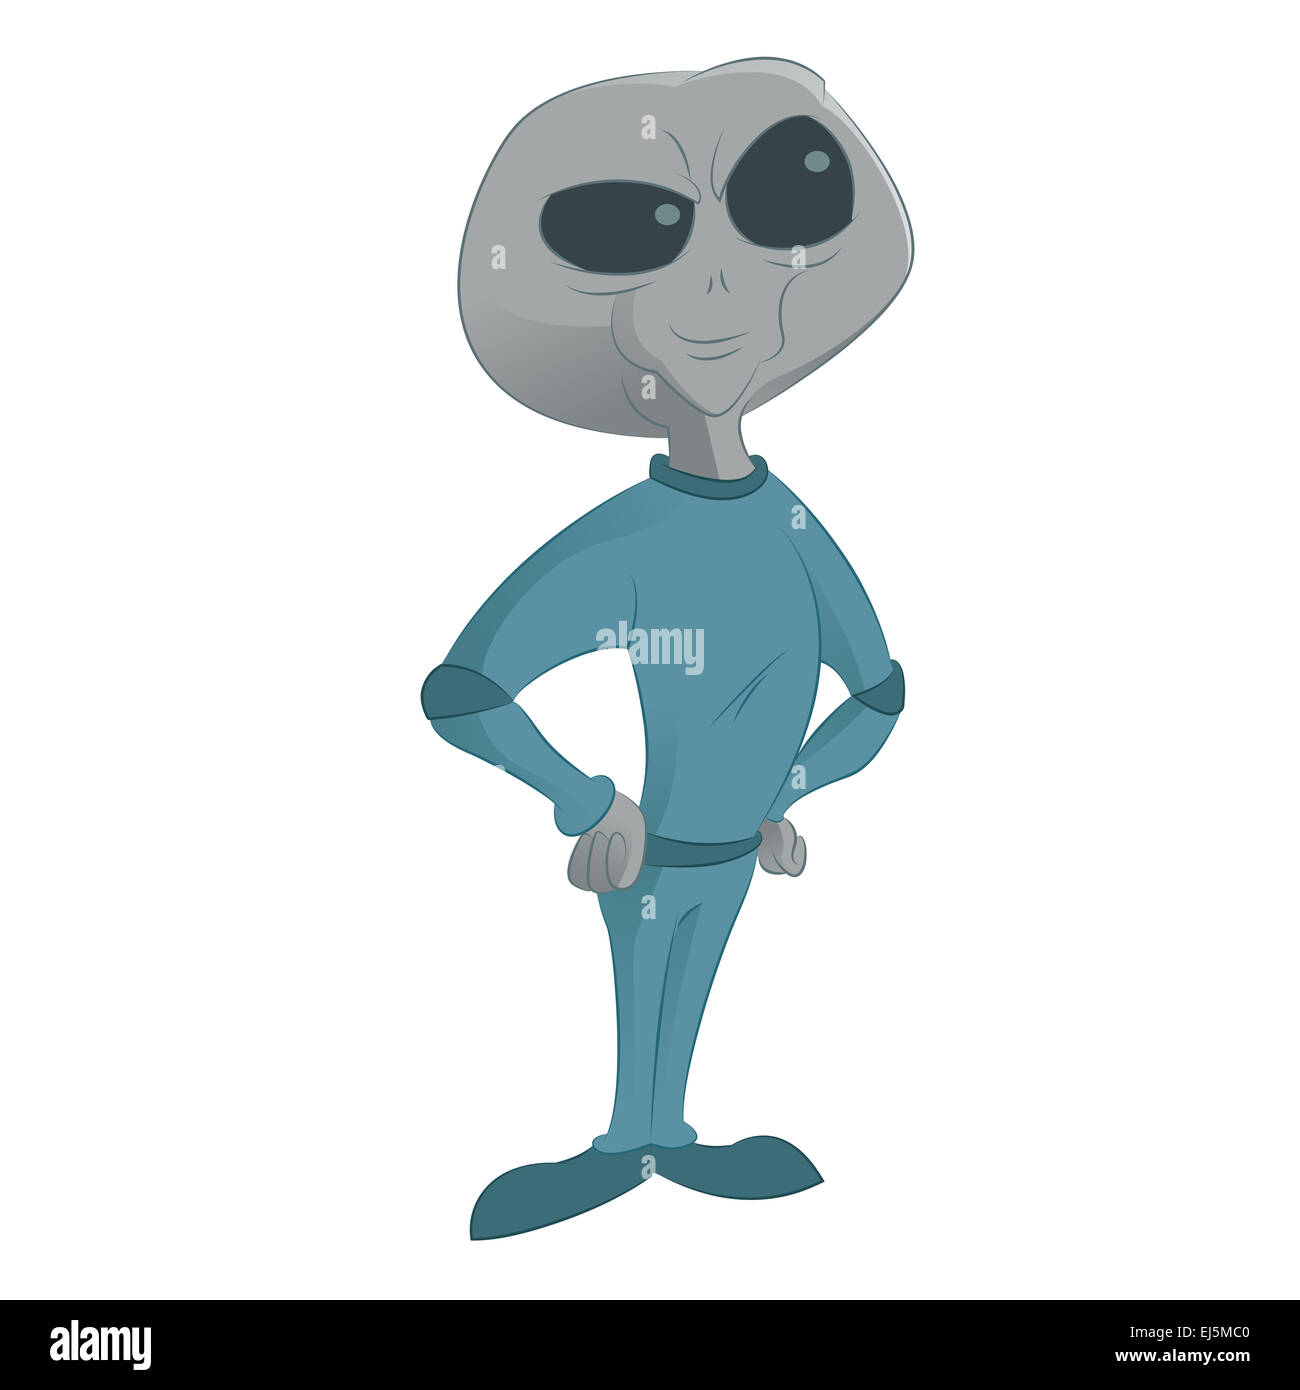 Vector image of the cartoon smiling Alien Stock Photo